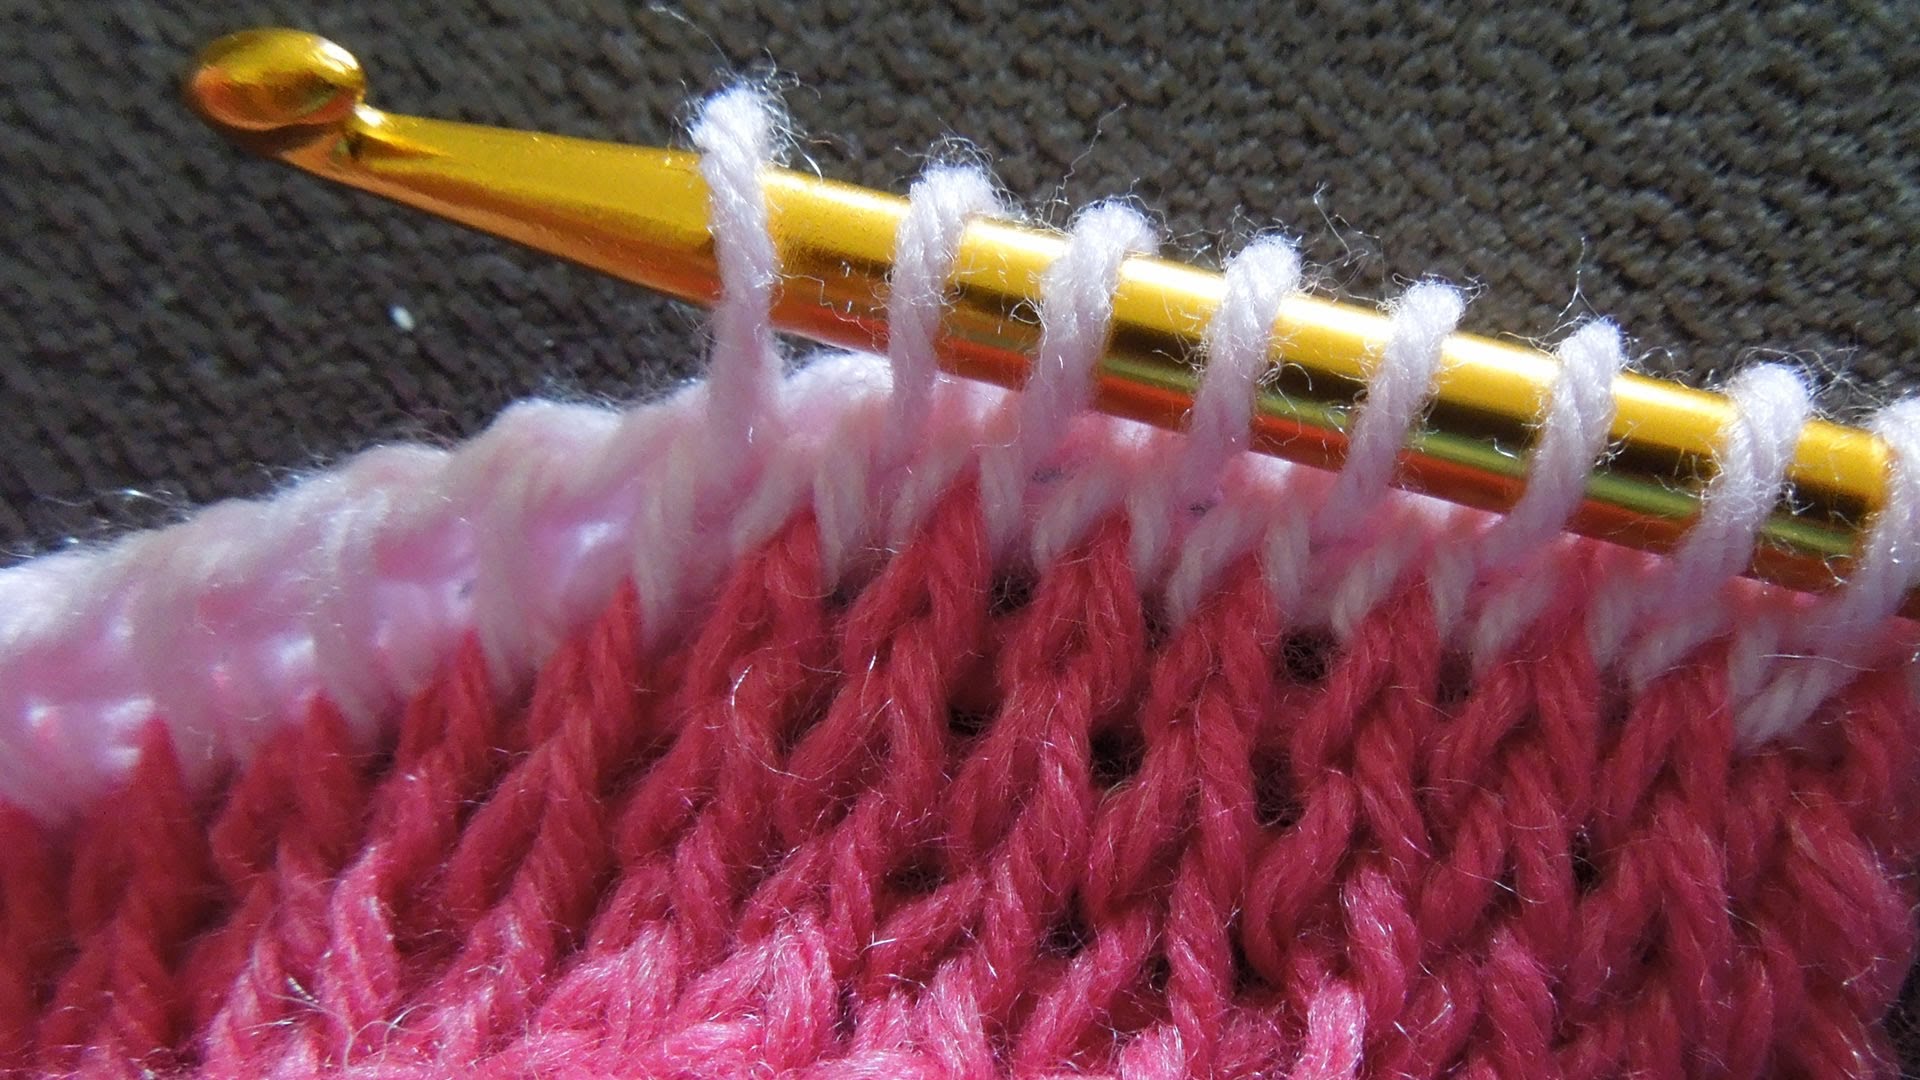 How To Crochet Tunisian Simple Stitch and Knit Stitch - YouTube